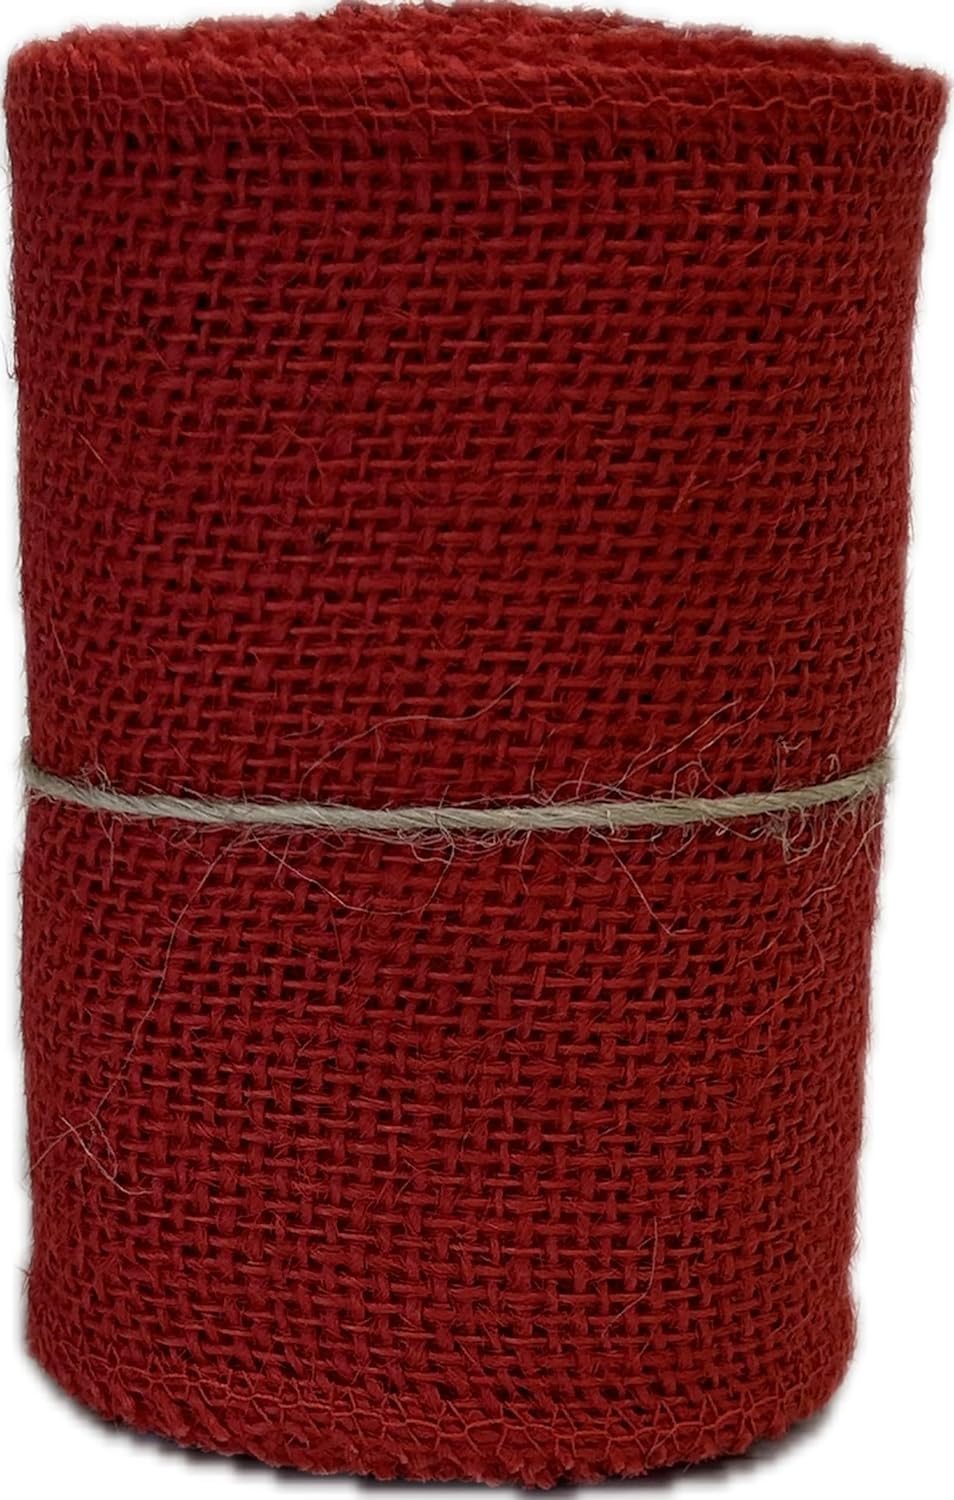 AAYU Brand Premium red 5&quot; Burlap Ribbon Rolls | Red 5 Inch x 5 Yards 100% Natural, Eco-Friendly, Natural Floral Arrangements and Gift Decor (Red)